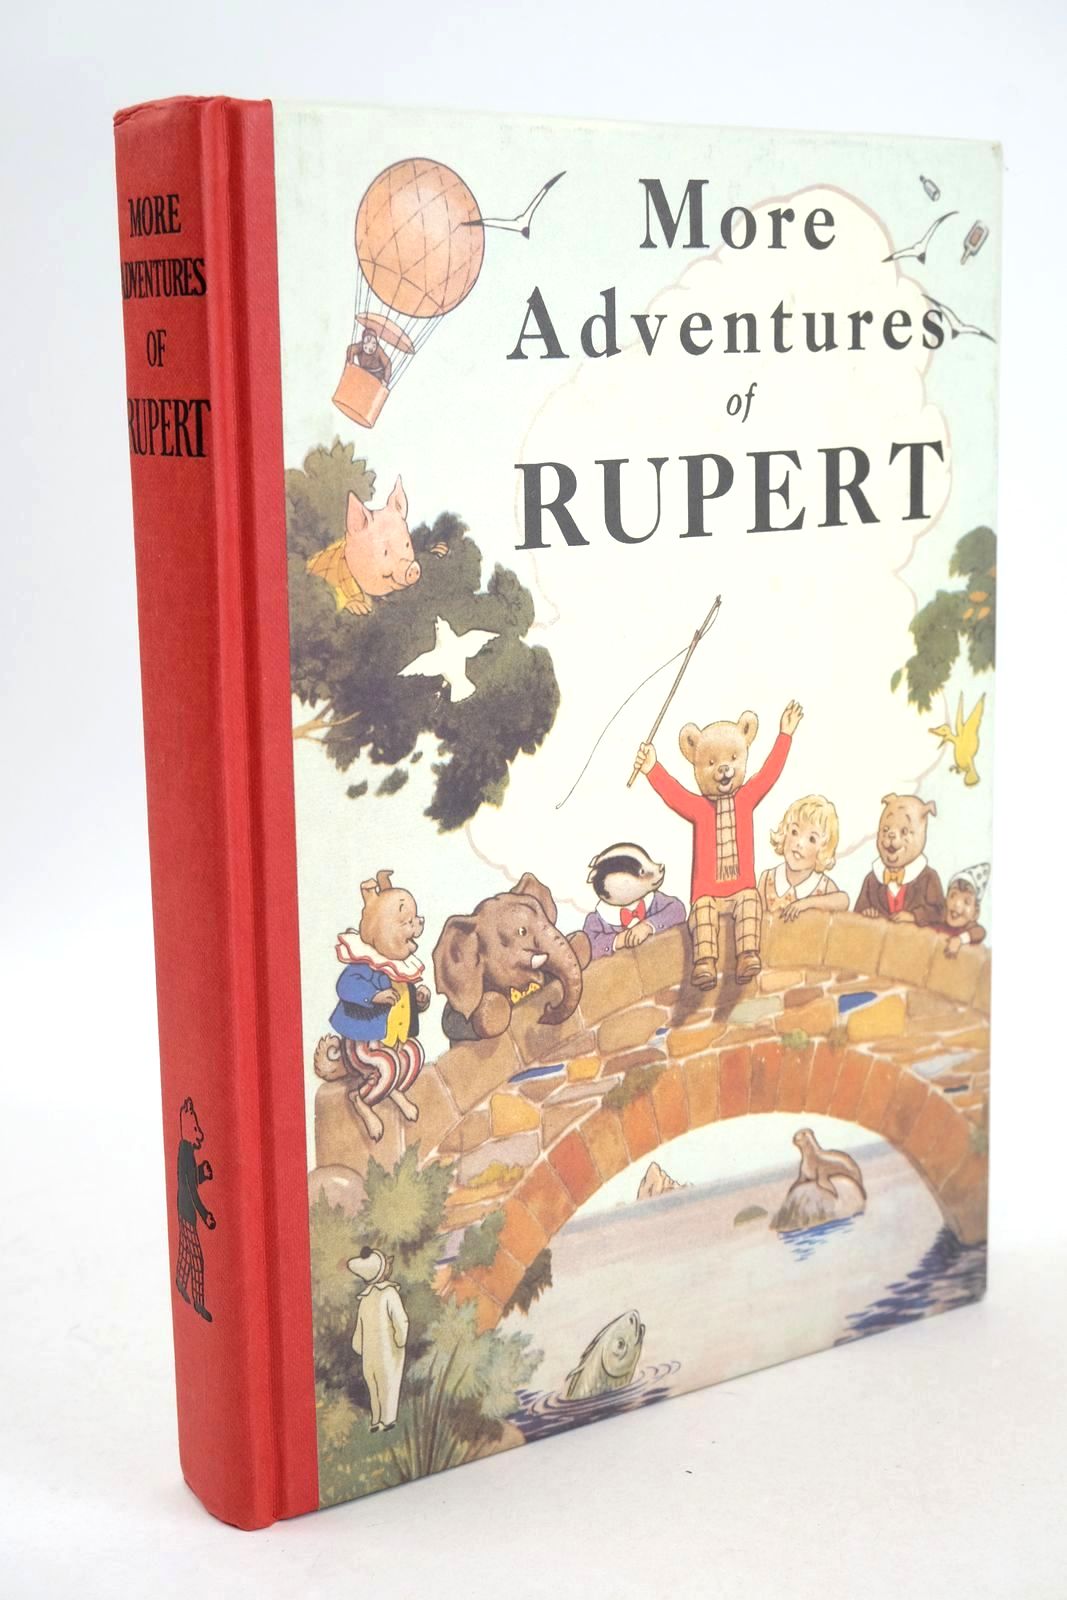 Photo of RUPERT ANNUAL 1937 (FACSIMILE) - MORE ADVENTURES OF RUPERT written by Bestall, Alfred illustrated by Bestall, Alfred published by Express Newspapers Ltd. (STOCK CODE: 1326242)  for sale by Stella & Rose's Books